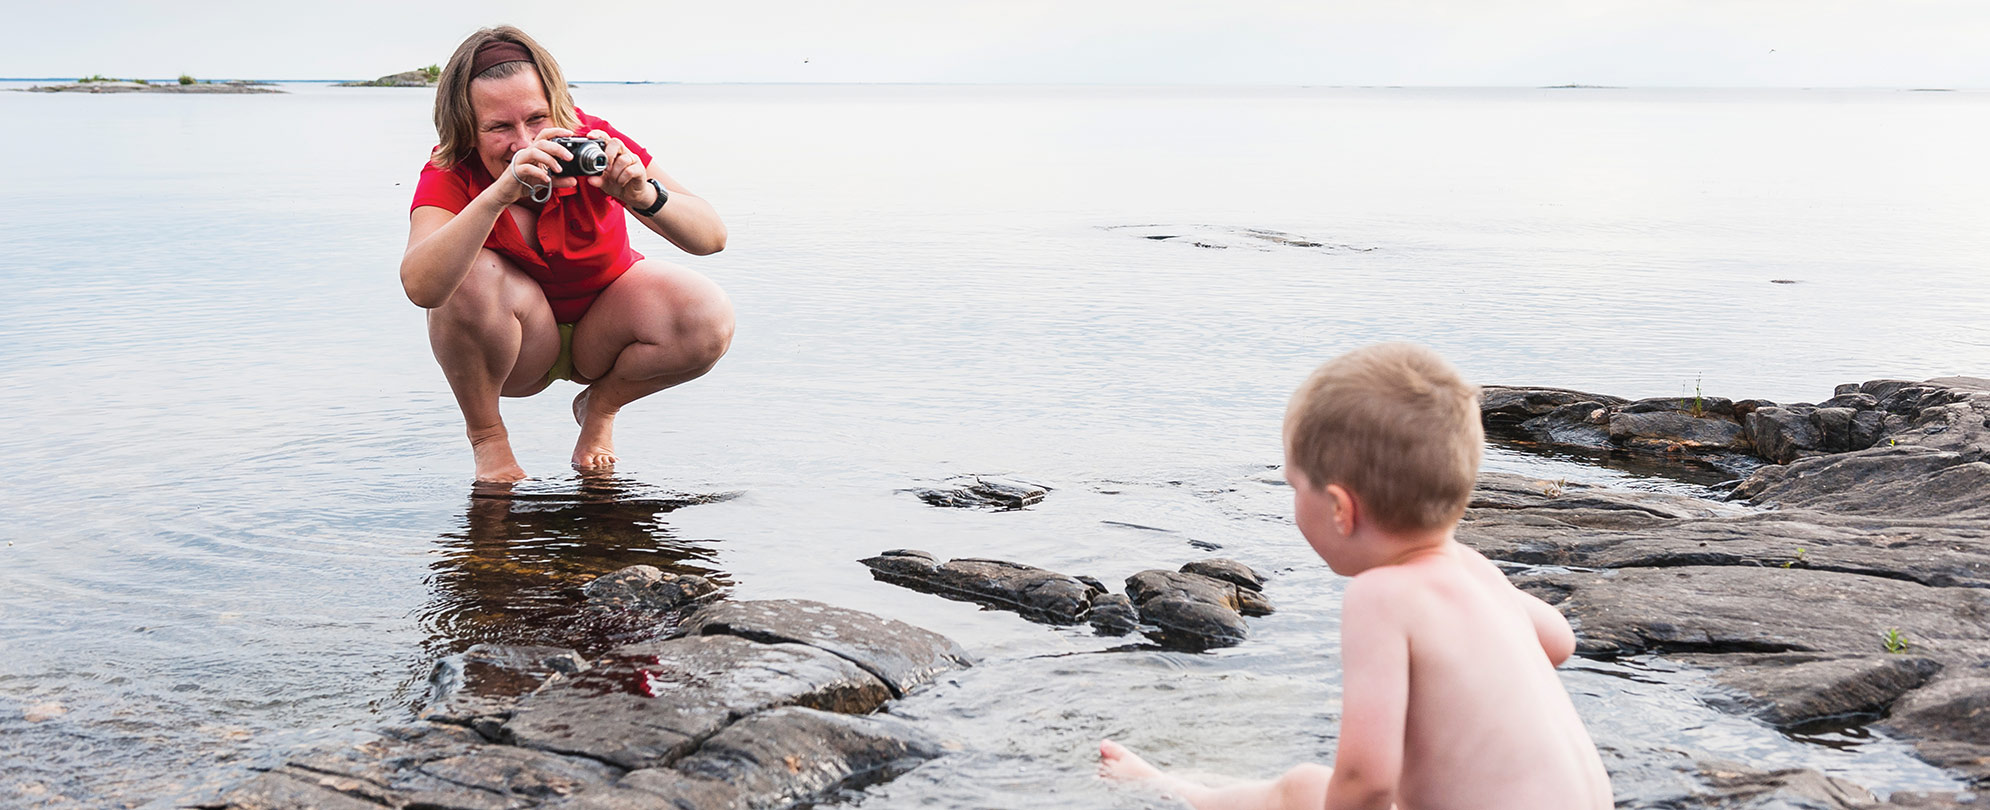 A mom bends down to take a photo of her young son on a rocky shoreline.